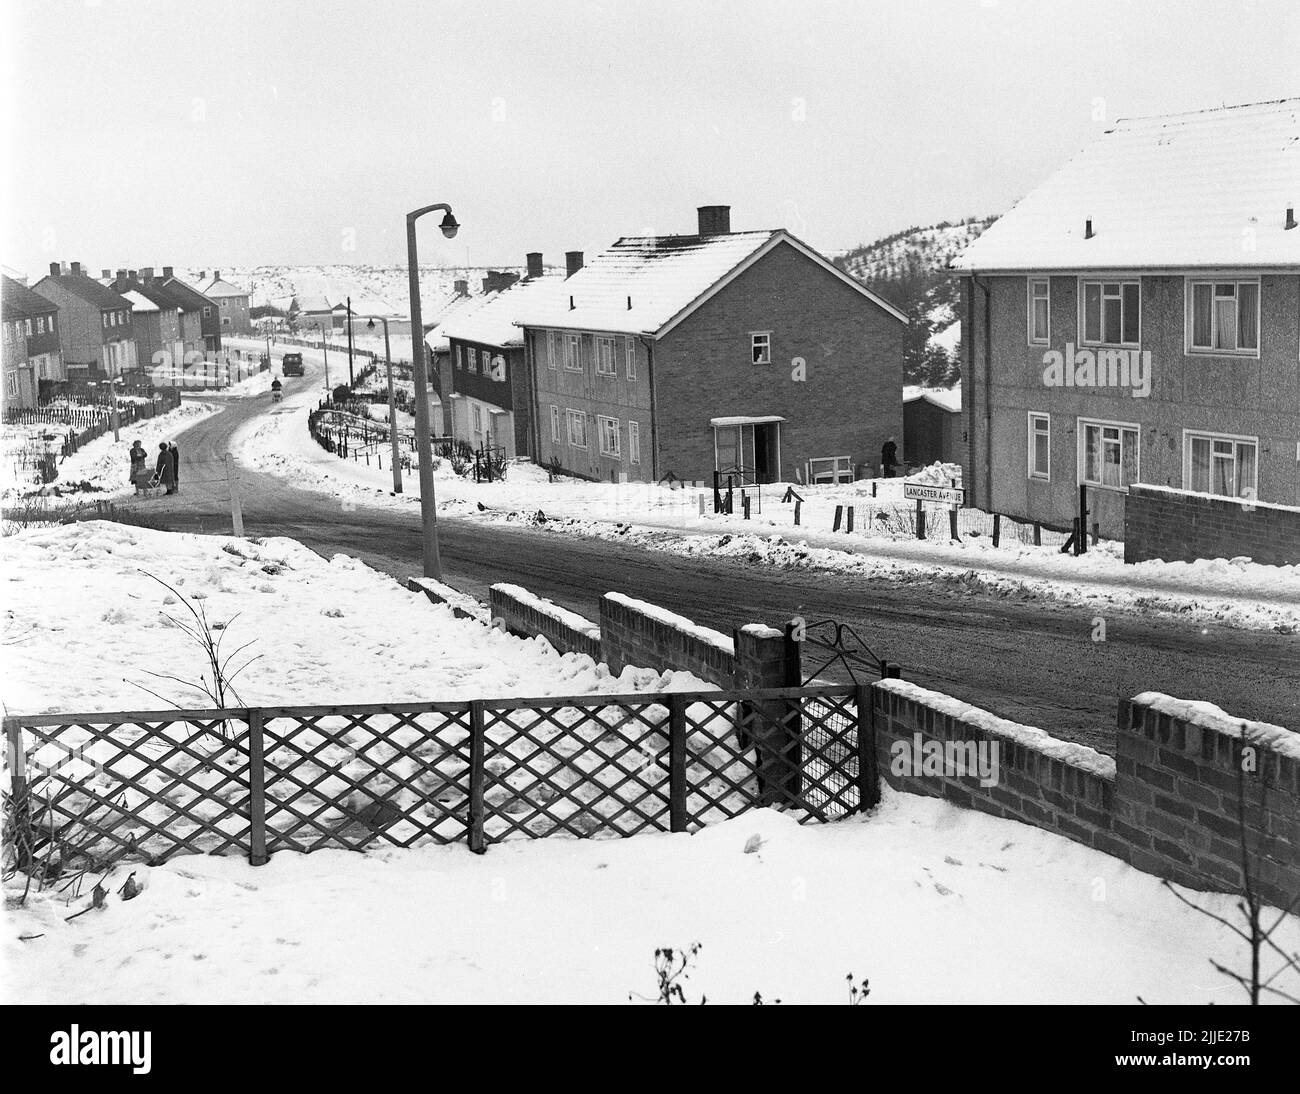 Council housing estate Britain in Winter January 21st 1965 PICTURE BY DAVID BAGNALL Stock Photo